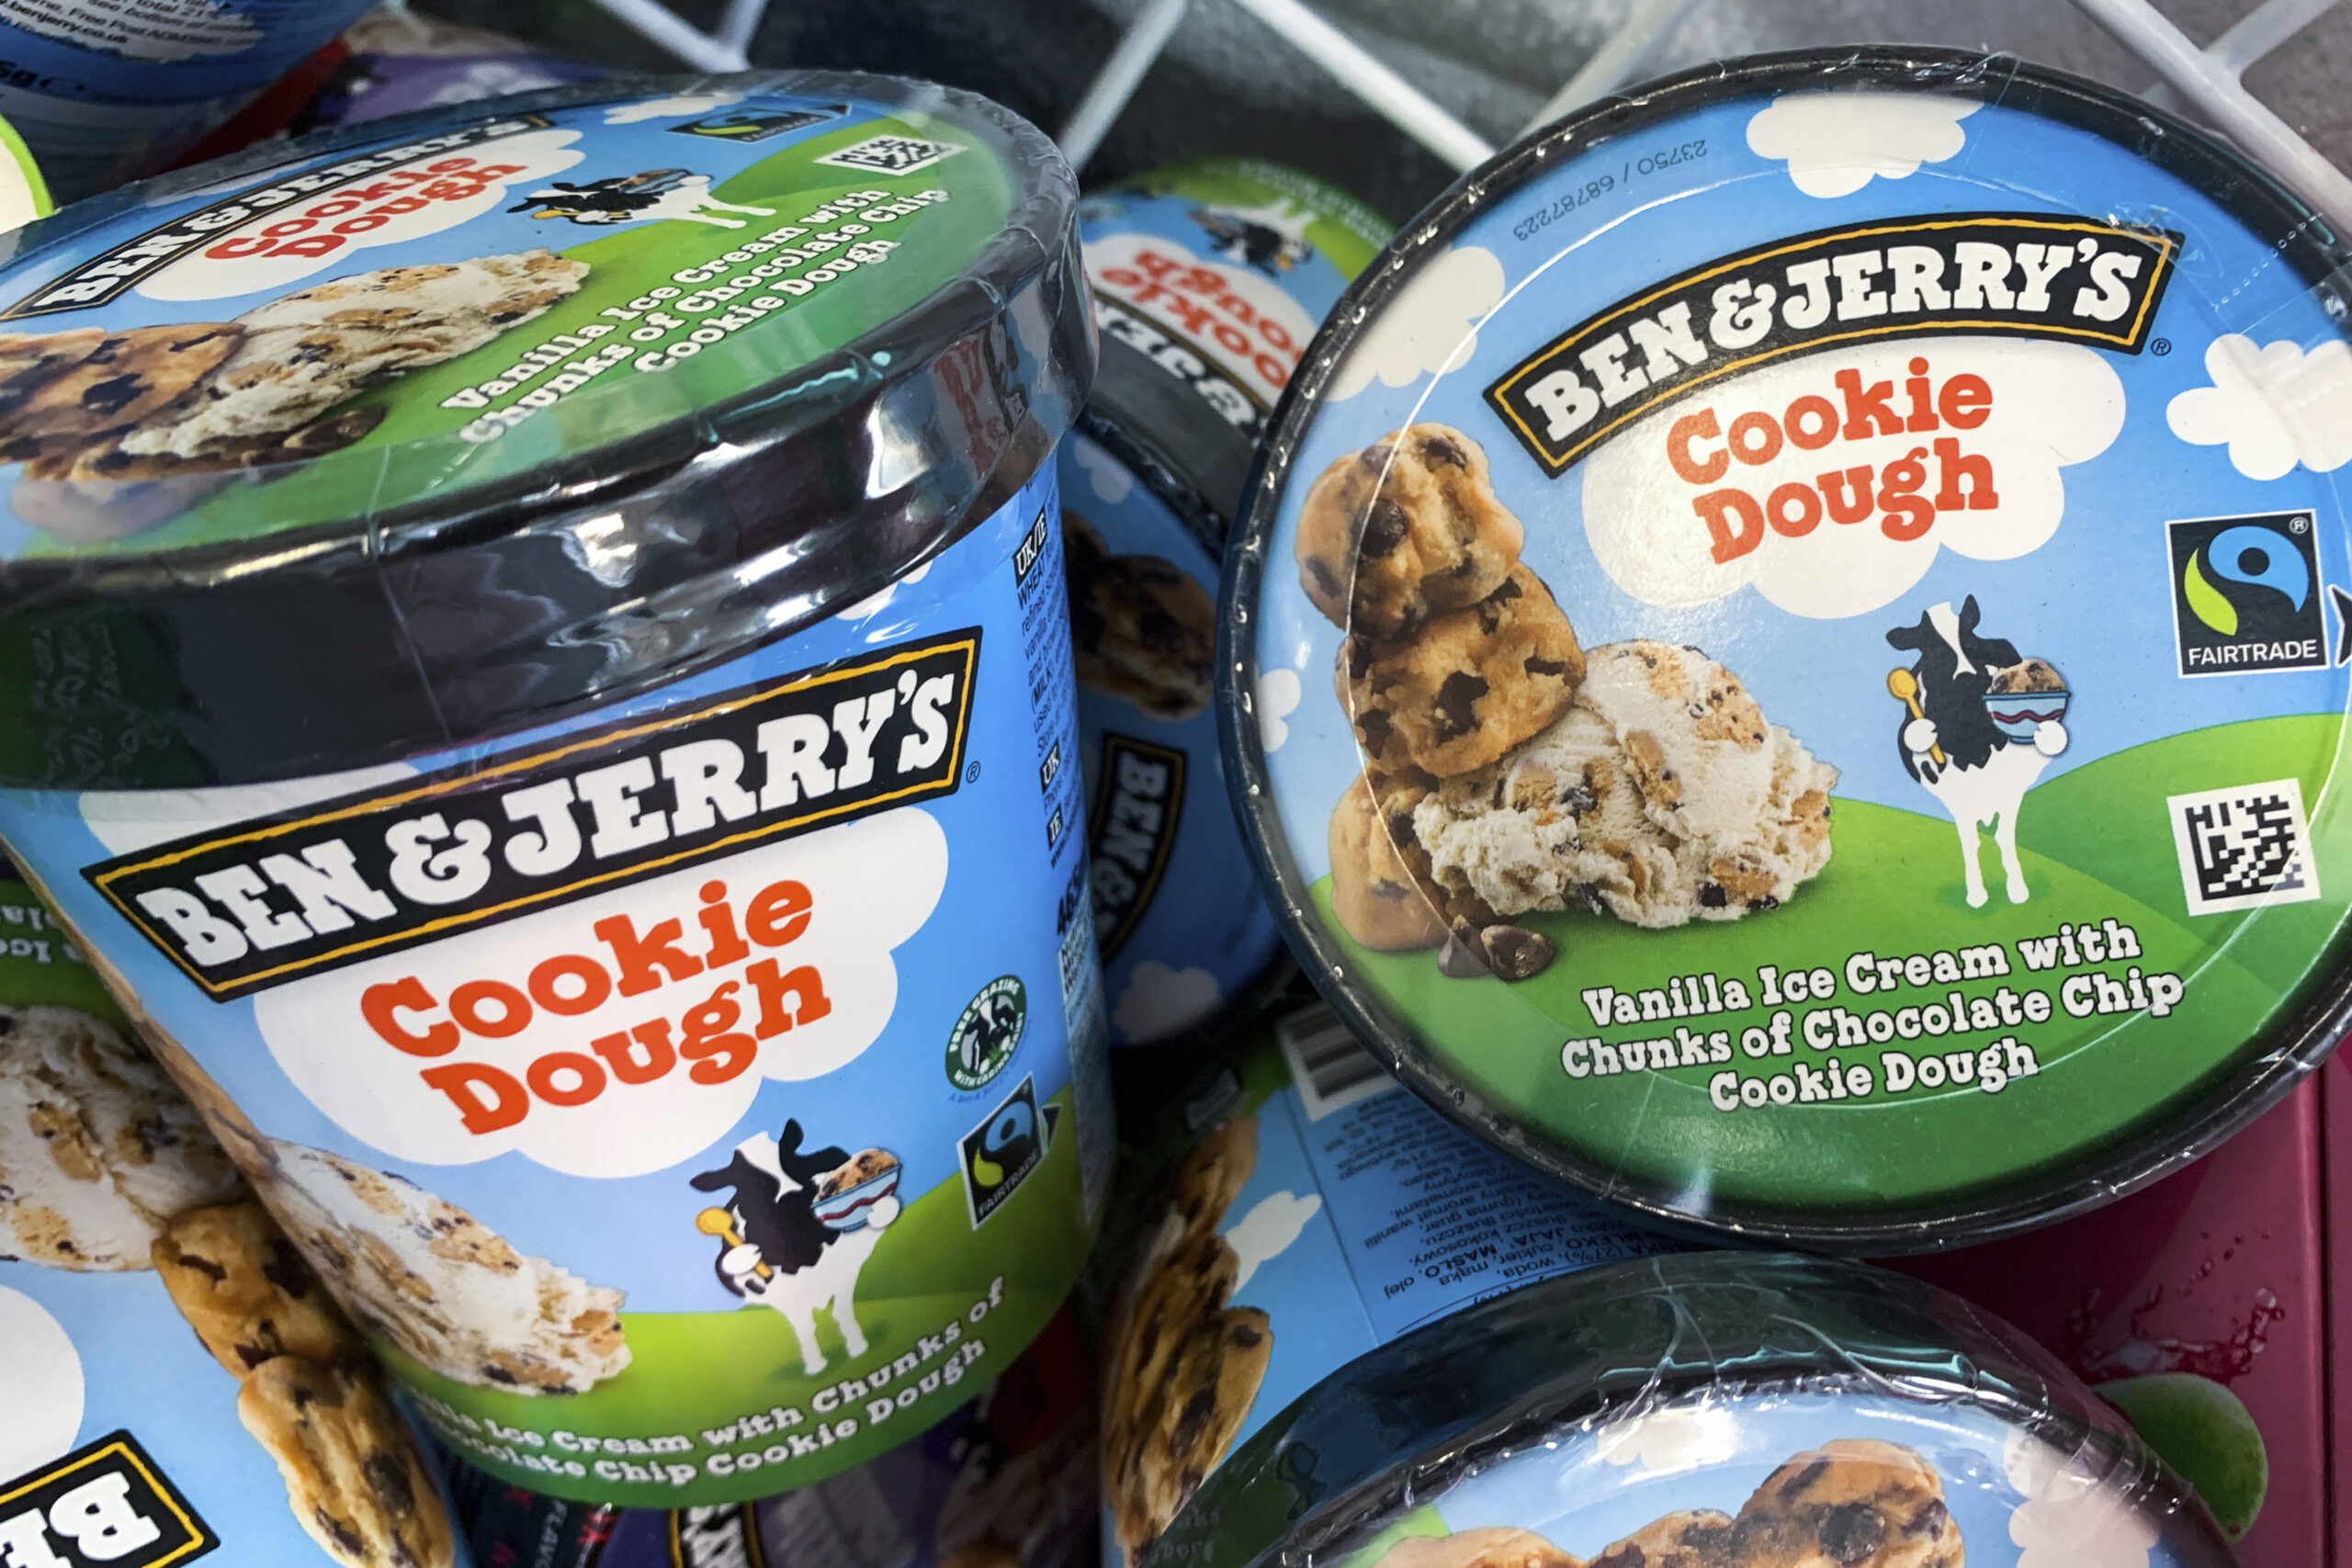 Ben & Jerry’s Release July 4 Message Calling for ‘Stolen Indigenous